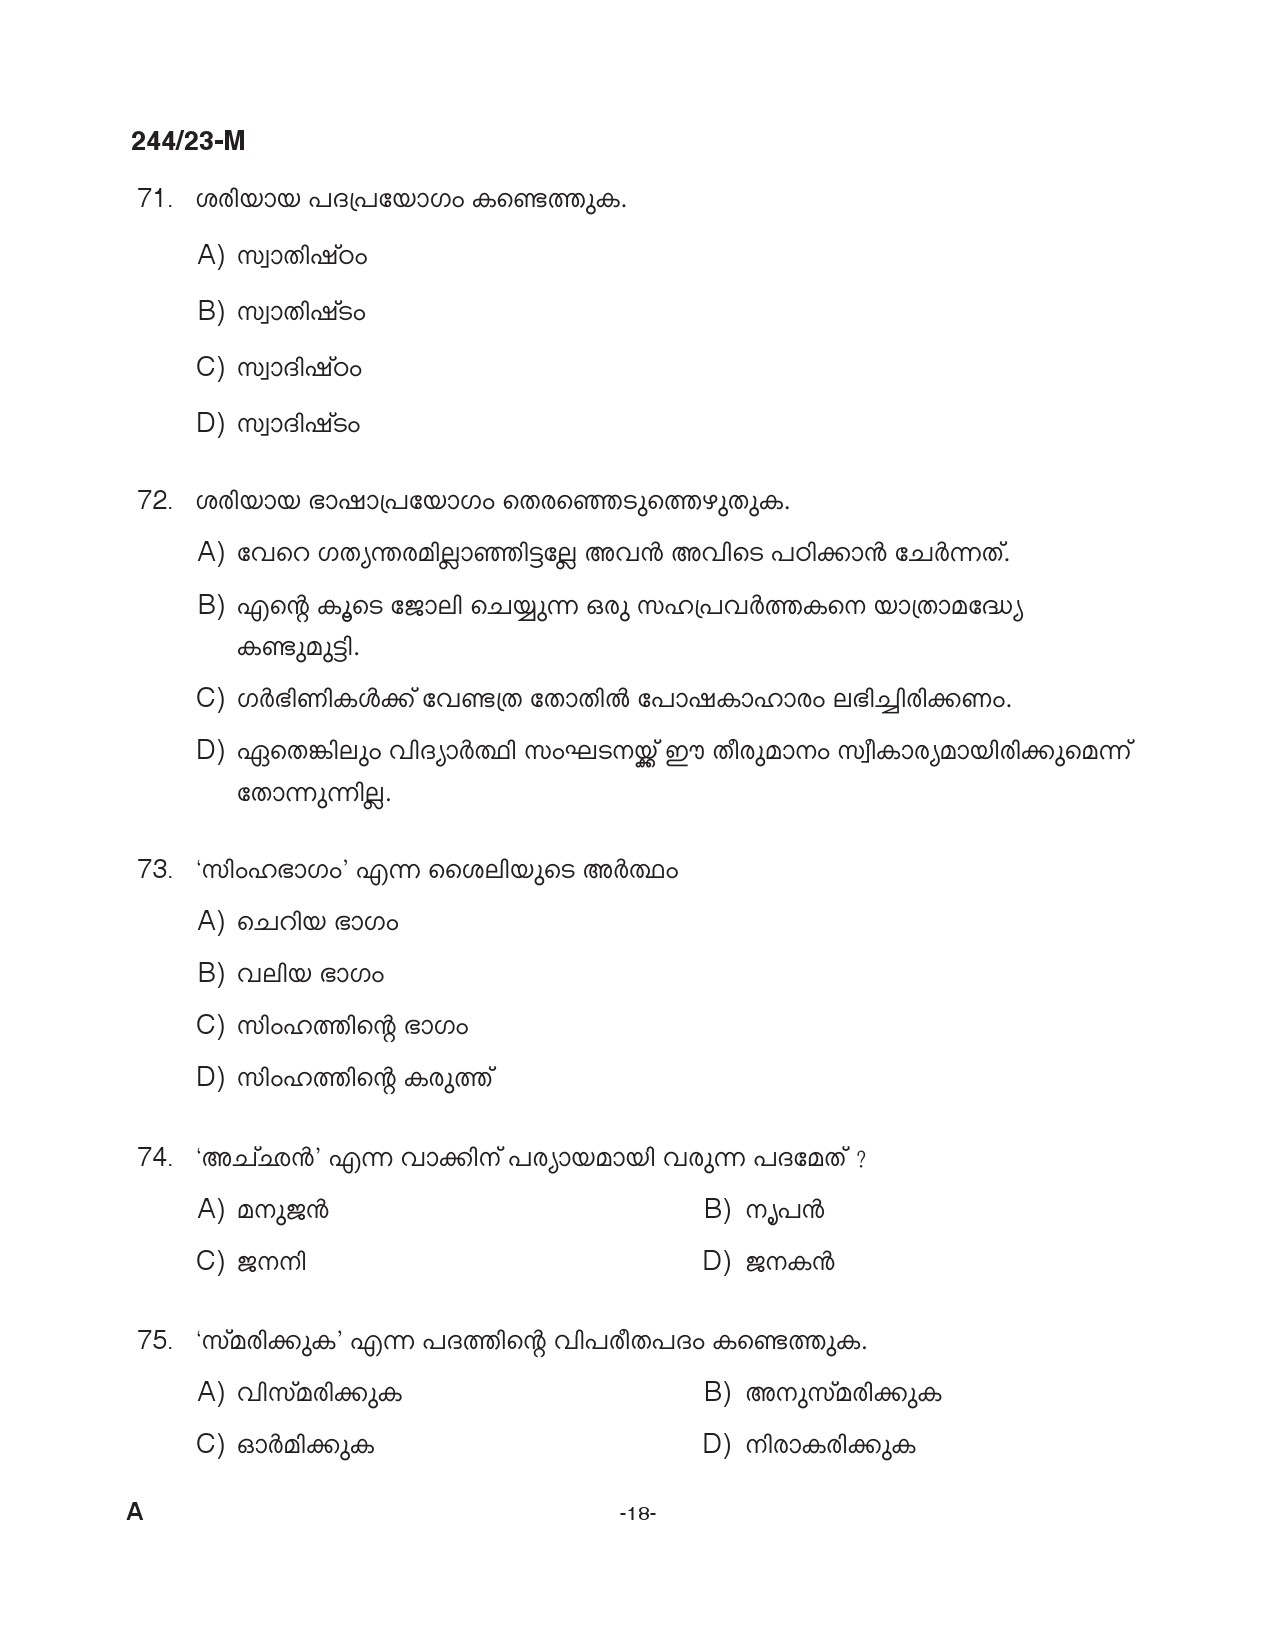 KPSC Fire and Rescue Officer Trainee Malayalam Exam 2023 Code 2442023 M 17